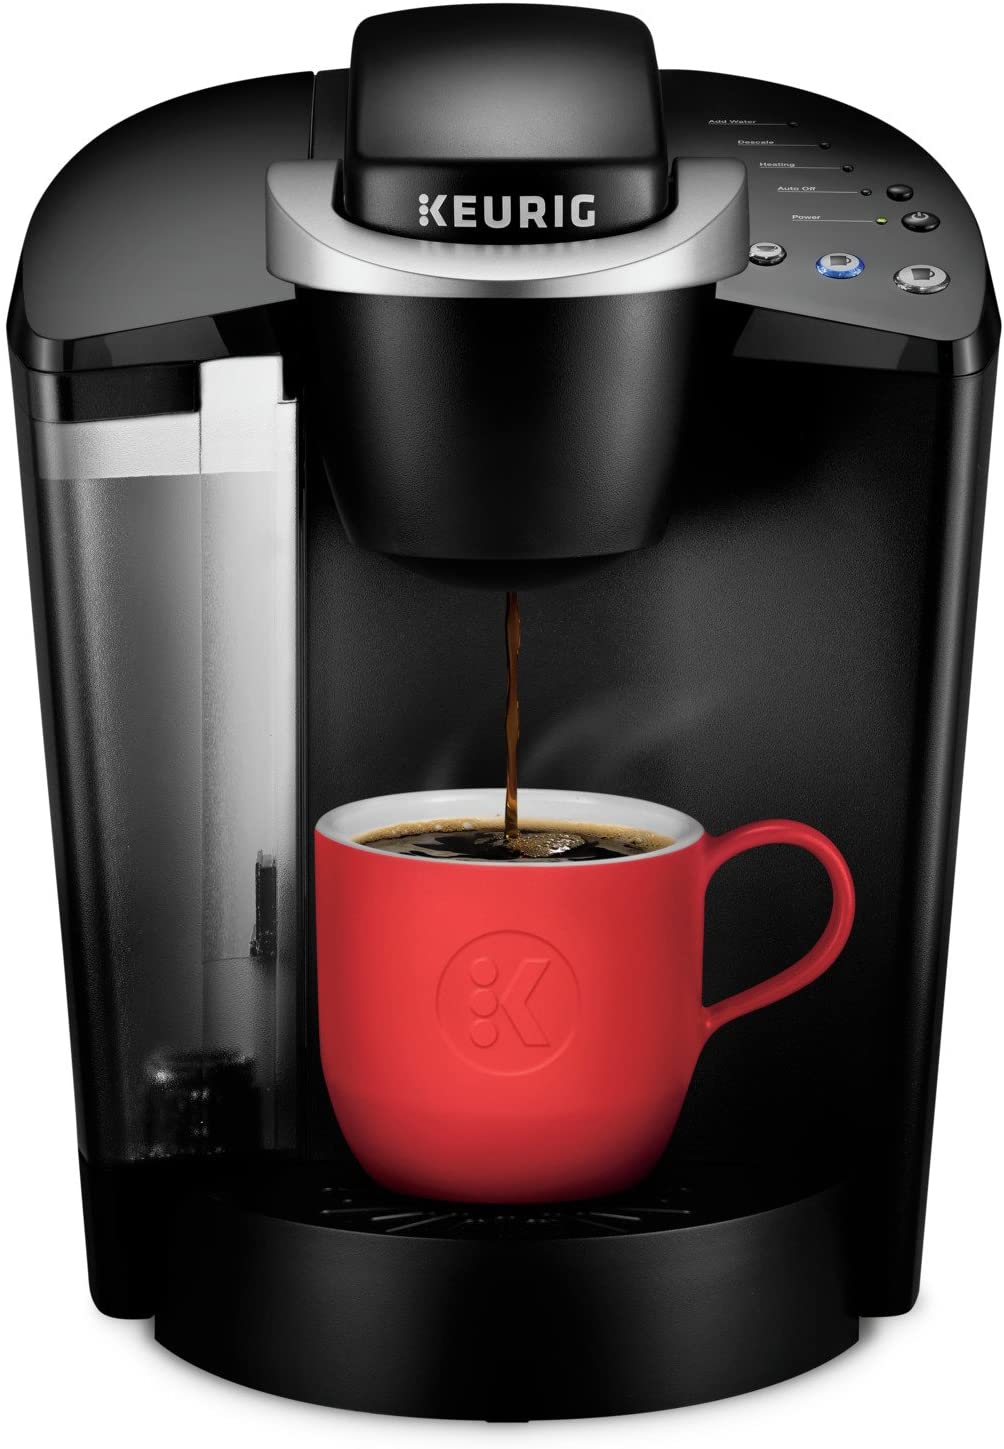 How Much Are Keurig Coffee Makers 